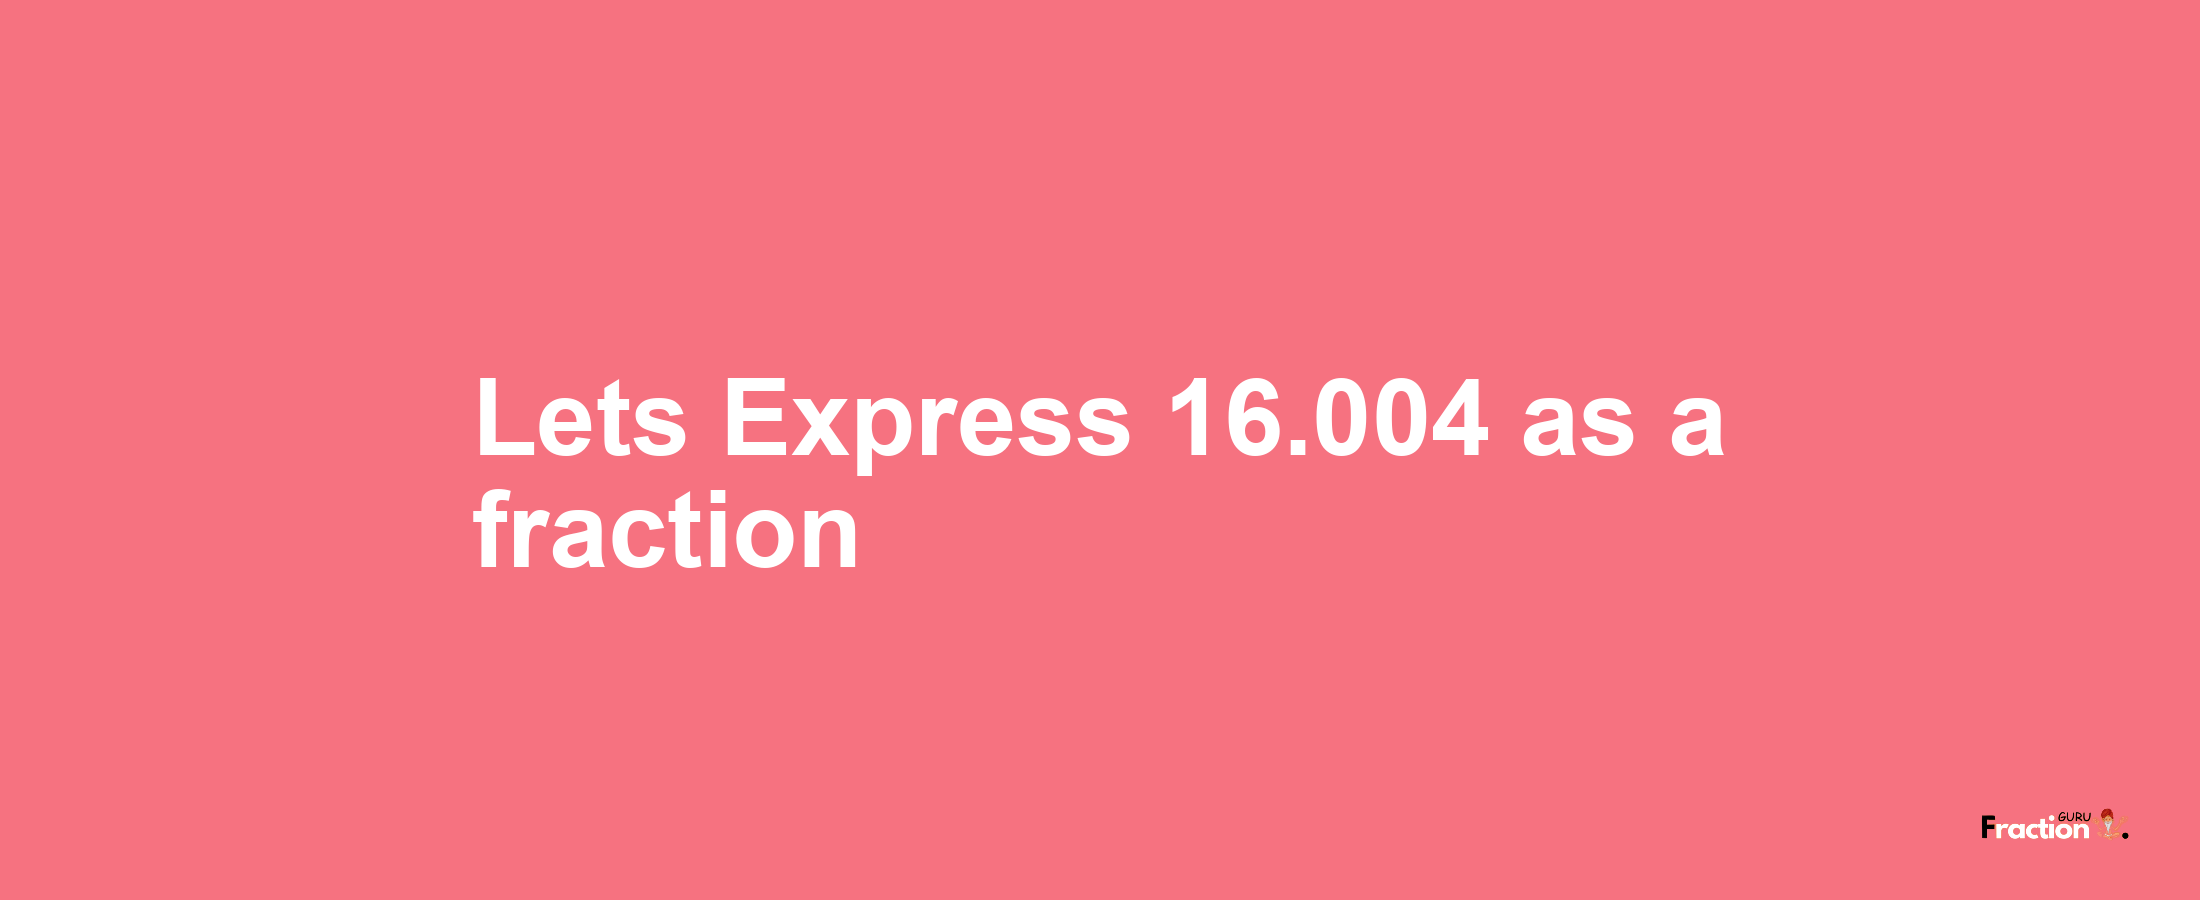 Lets Express 16.004 as afraction